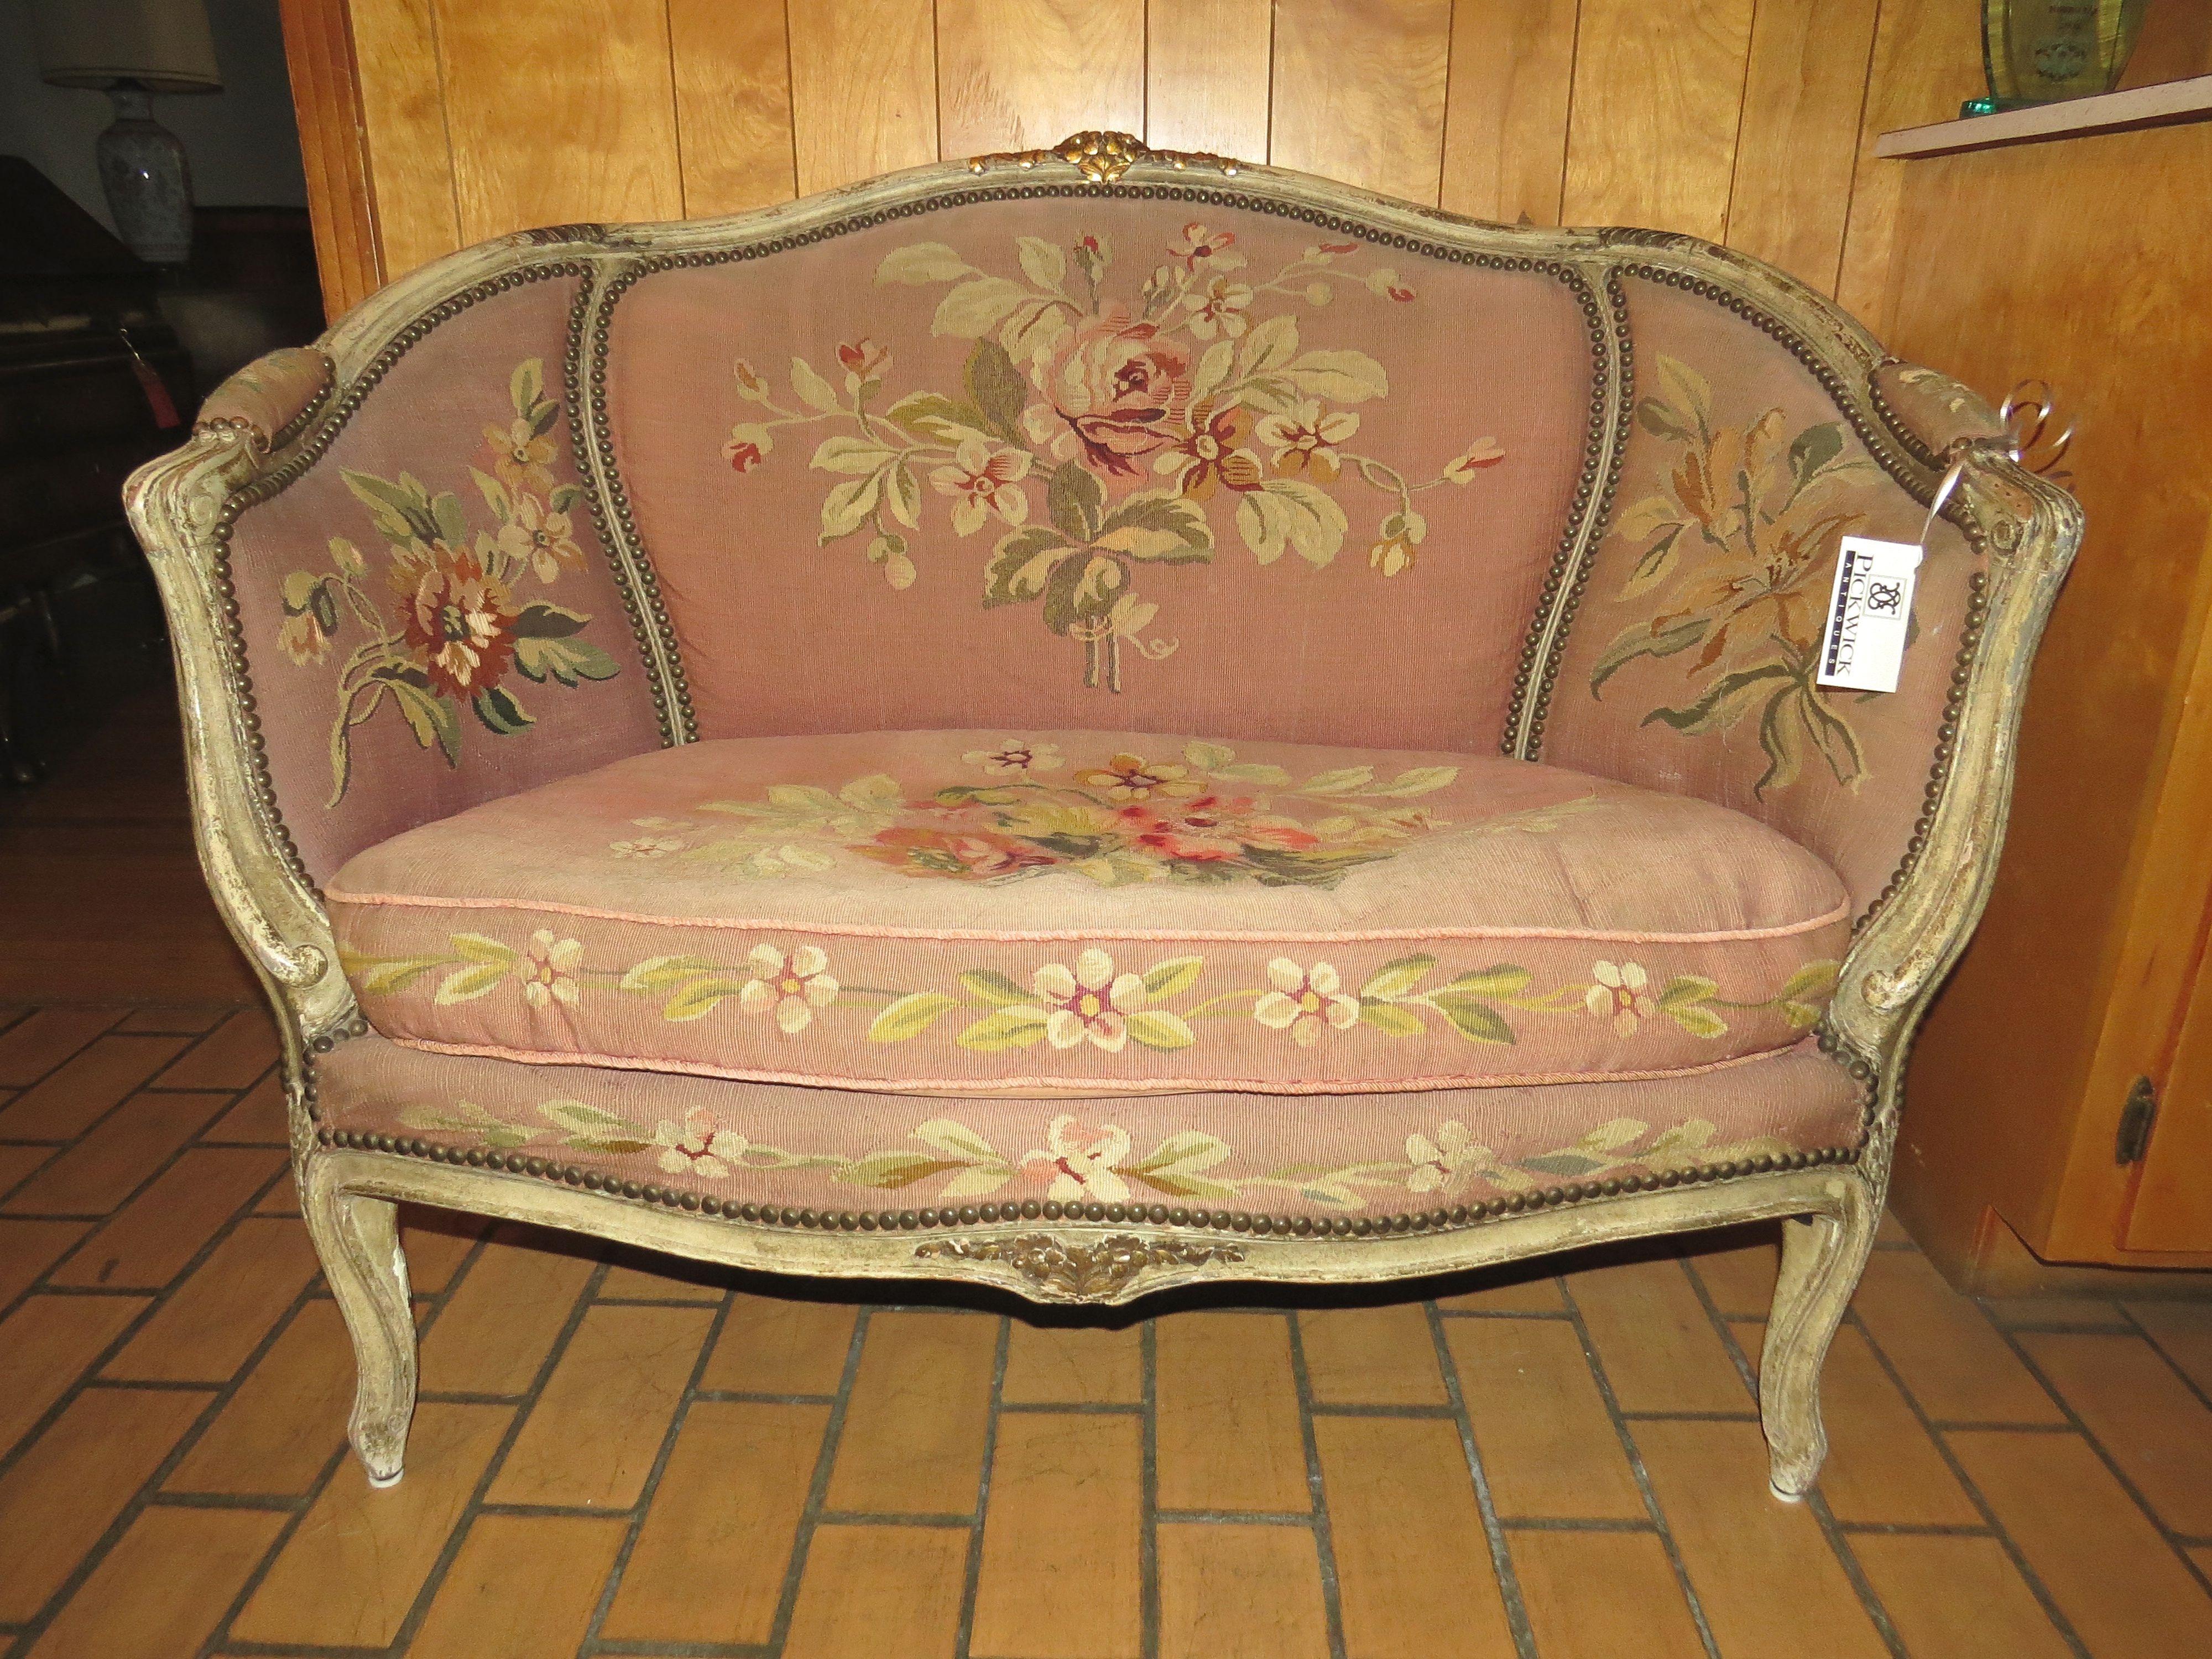 Louis XVI Style Settee with Petit-Point Needlework Upholstery